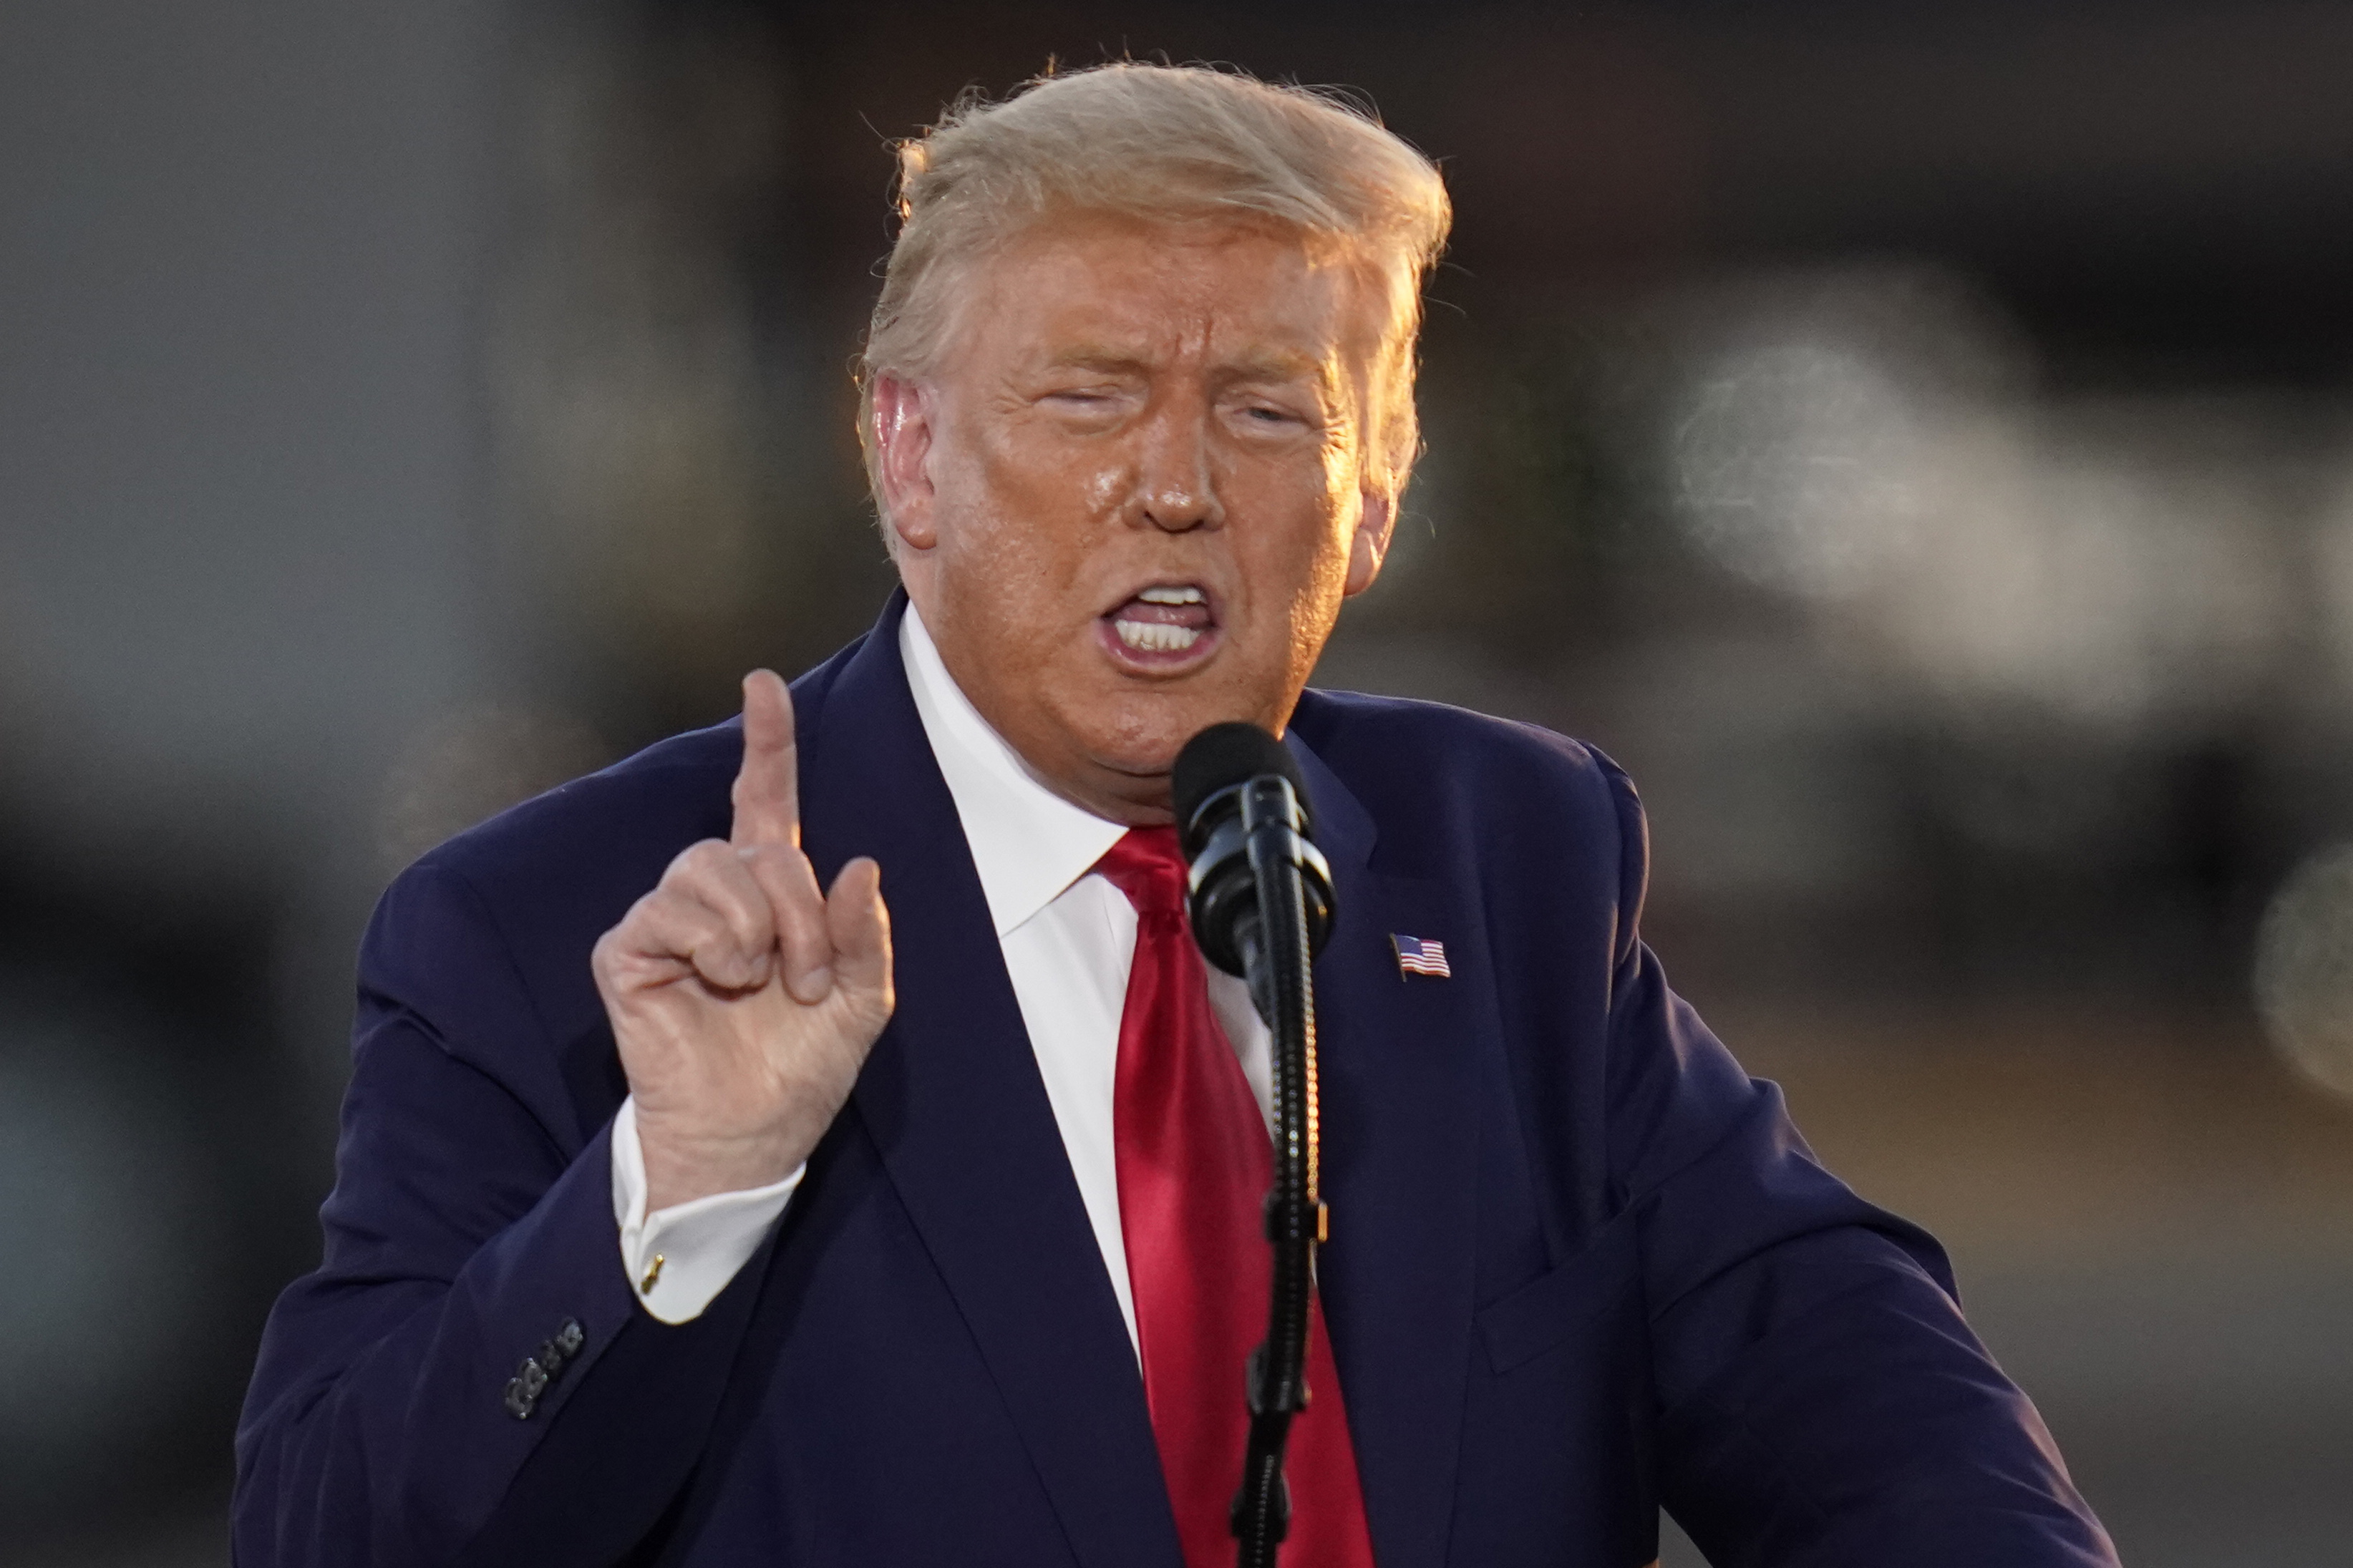 President Donald Trump speaks during a campaign rally at Manchester-Boston Regional Airport, Friday, Aug. 28, 2020, in Londonderry, N.H. Photo: AP